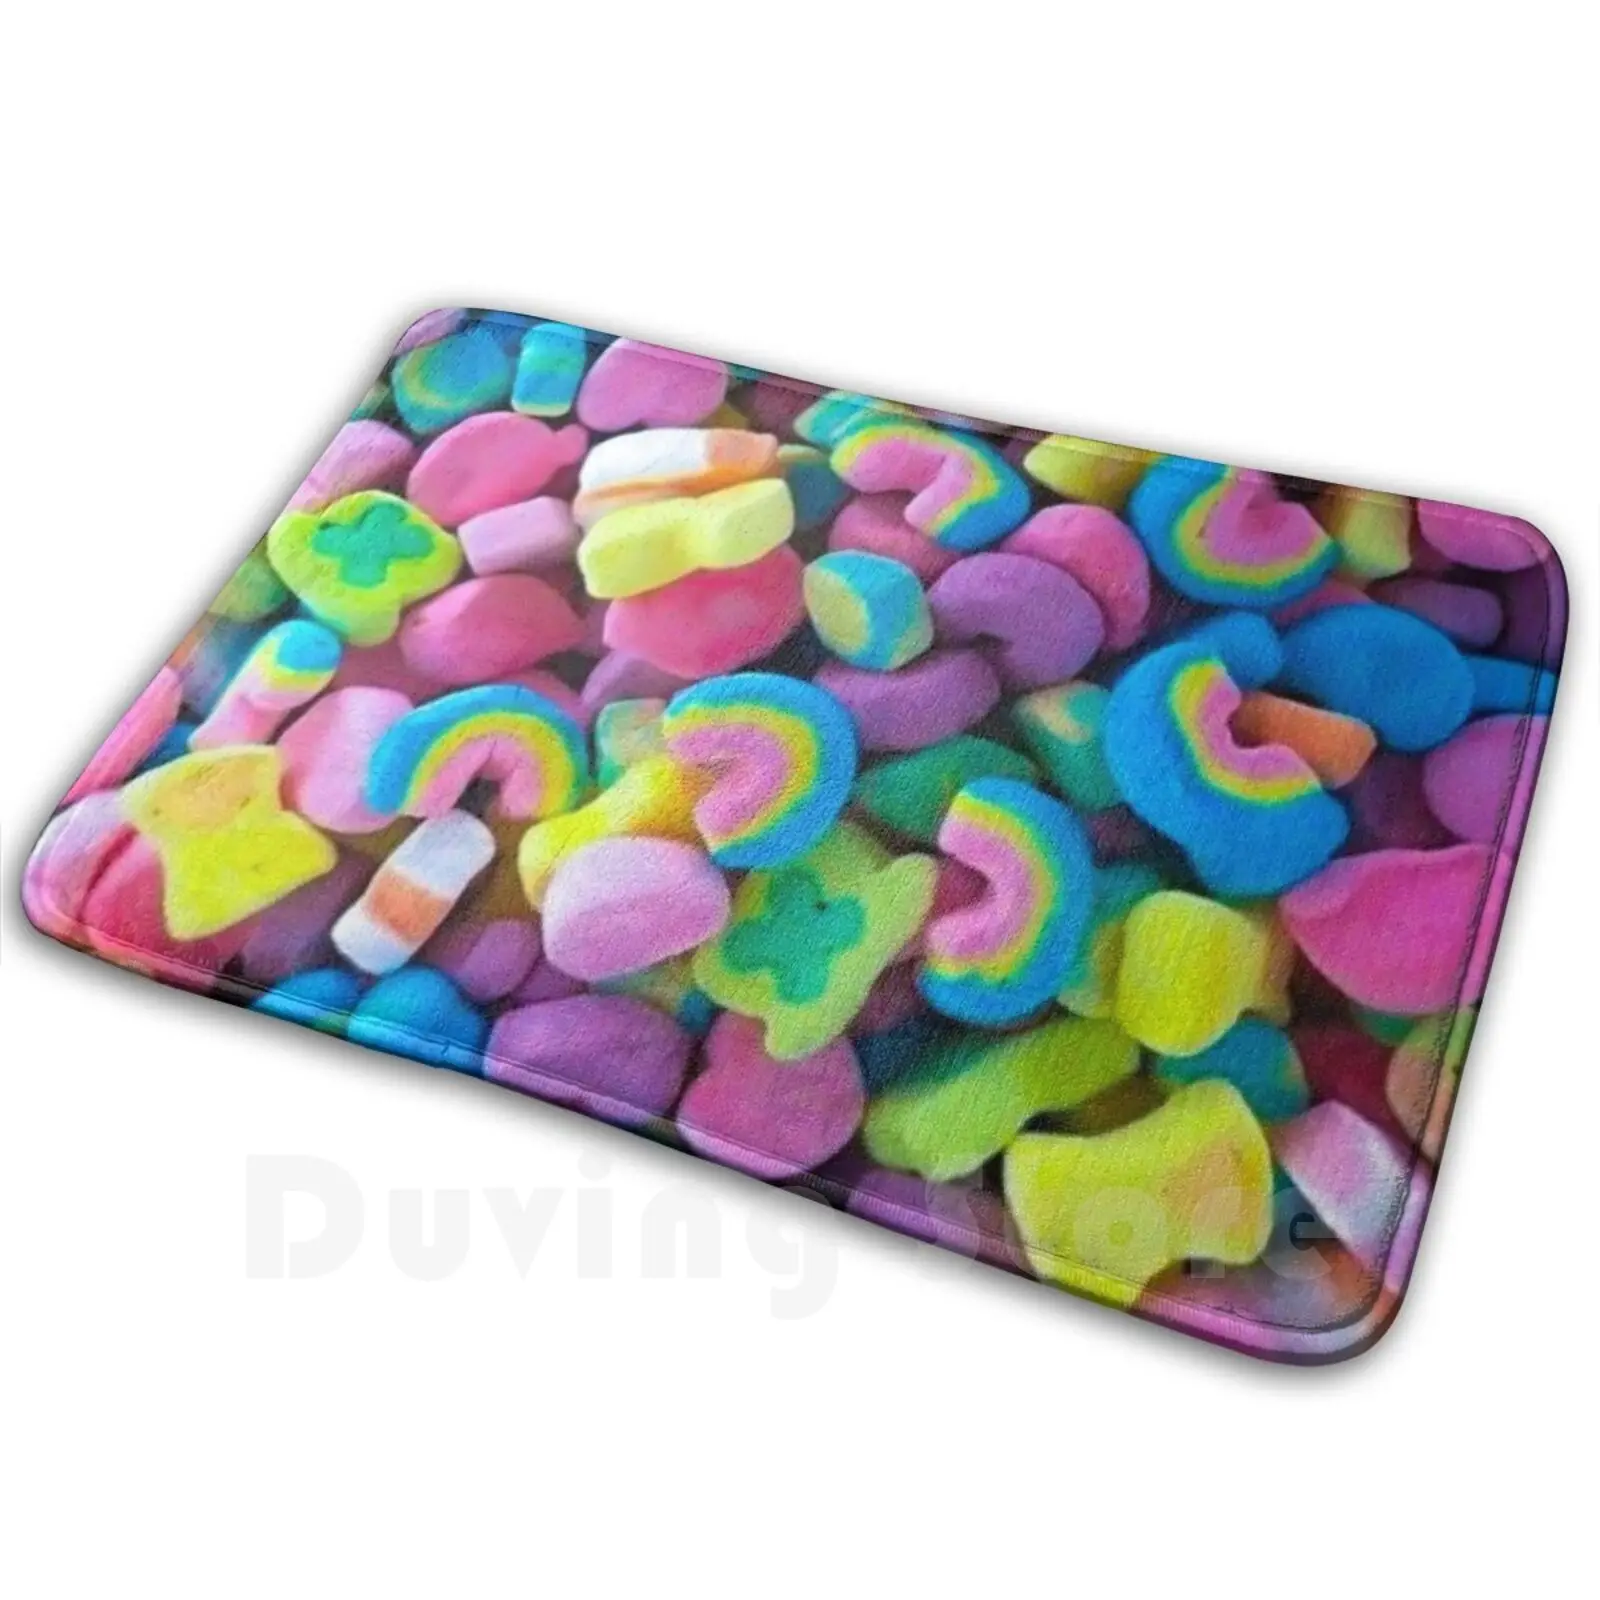 

Very Lucky Cereal Mat Rug Carpet Anti-Slip Floor Mats Bedroom Lucky Charms Cereal Cereal Killer Food Pizza Unicorn Colorful